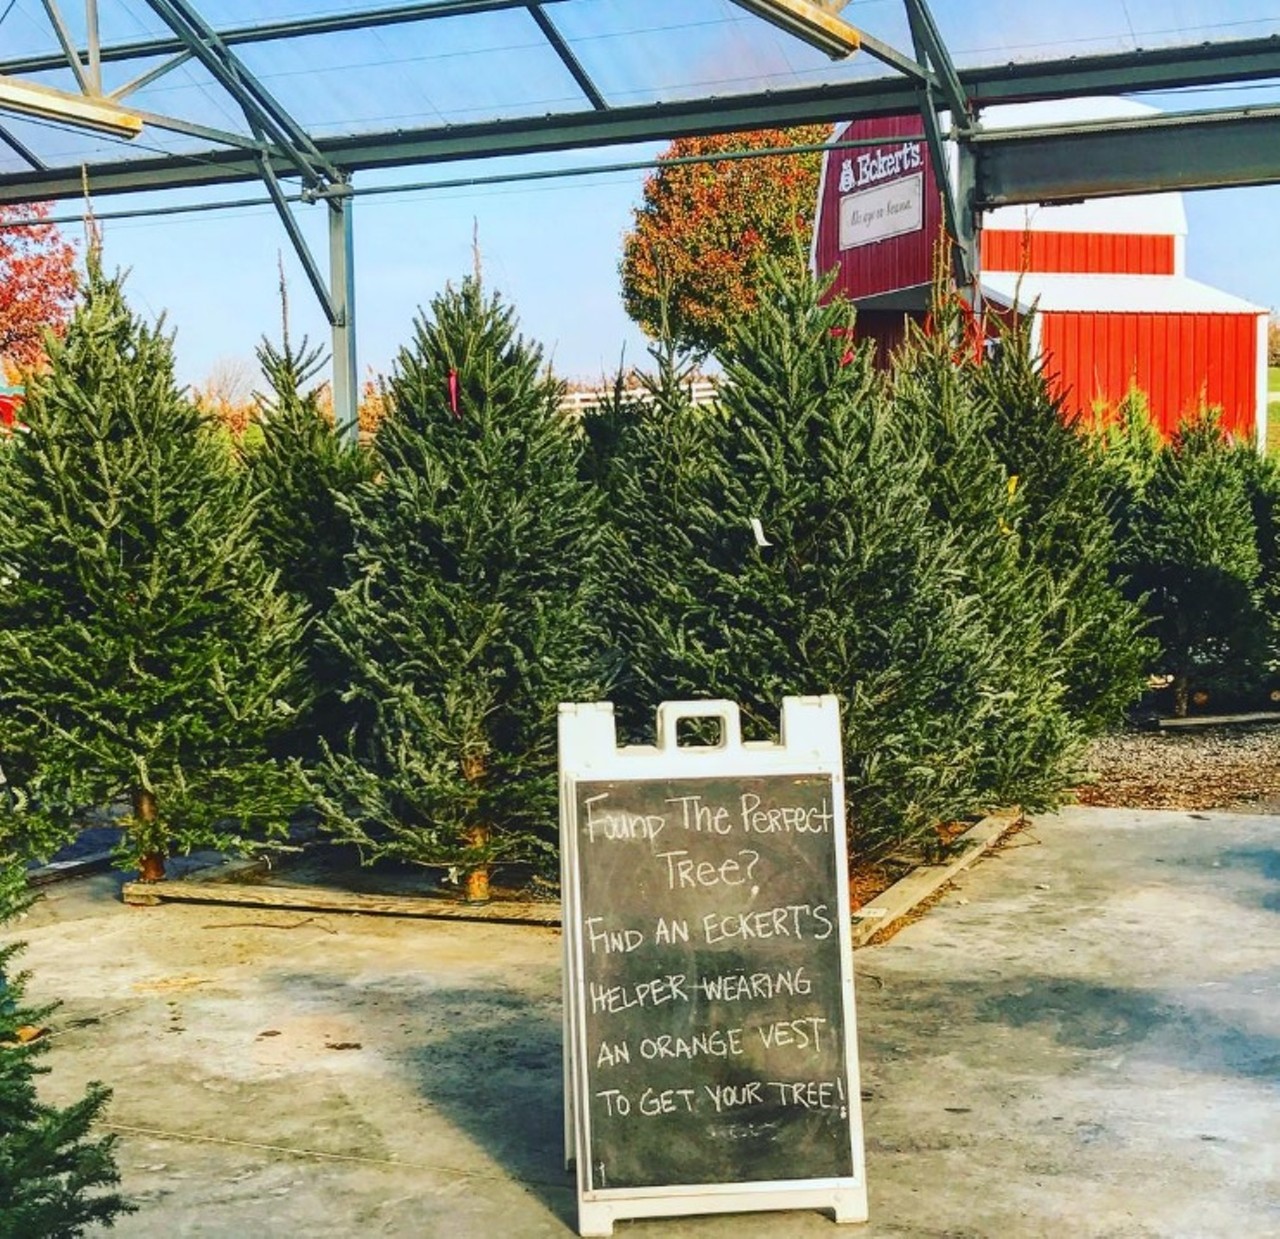 Eckert's
Locations in Belleville and Millstadt
Eckert's is a destination for all seasons in the Metro East, and the Belleville and Millstadt locations are a go-to for Christmas trees. You can cut your own or choose from the selection of pre-cut trees. Photo courtesy of Instagram / shaggy_5150.